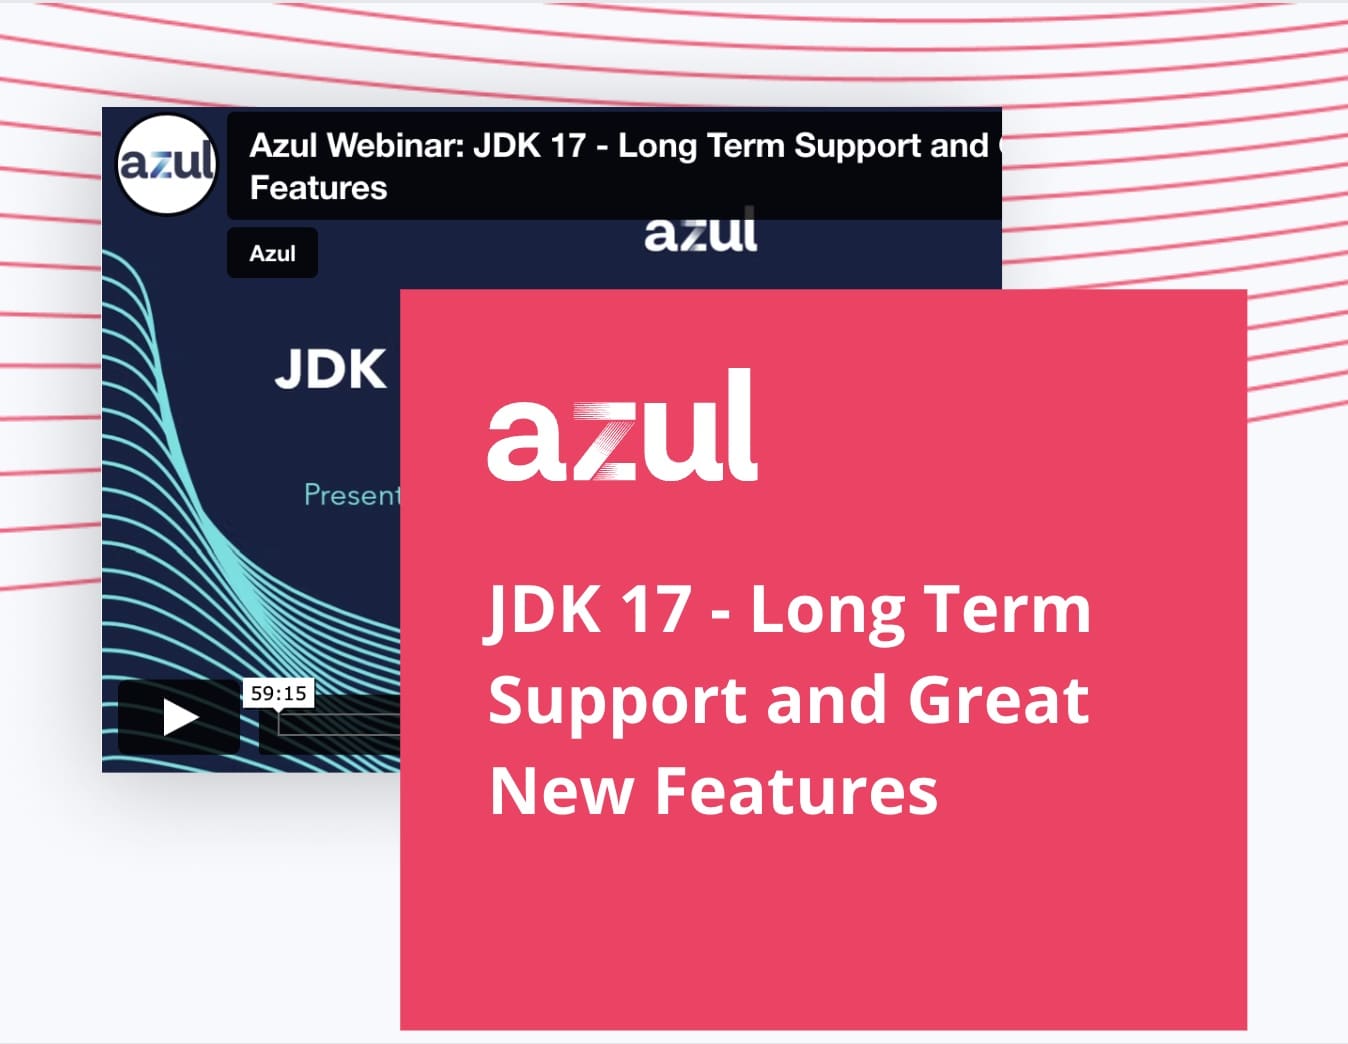 JDK 17 - Long Term Support and Great New Features